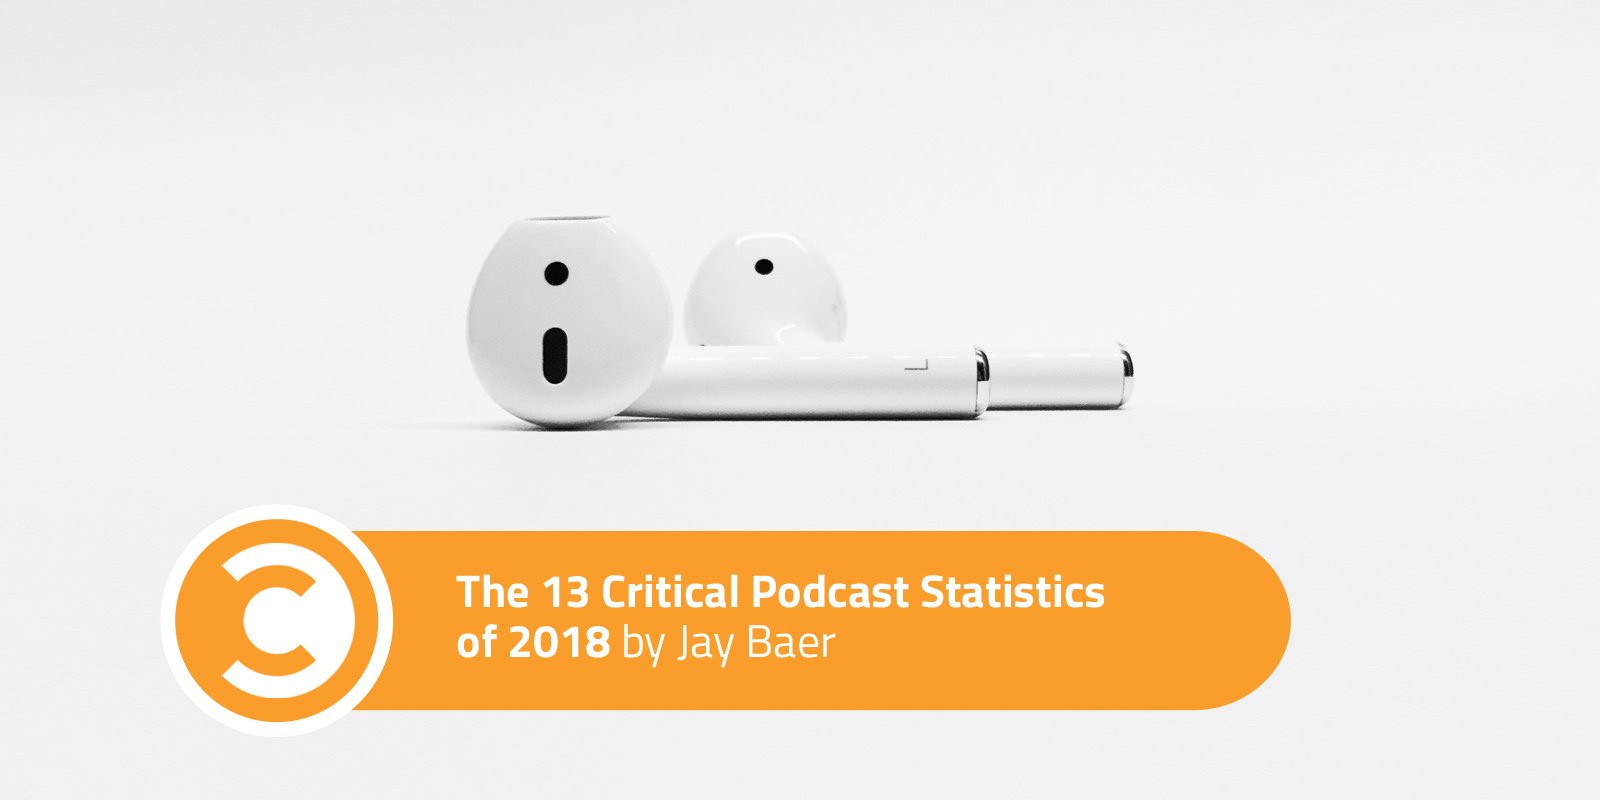 The 13 Critical Podcast Statistics of 2018